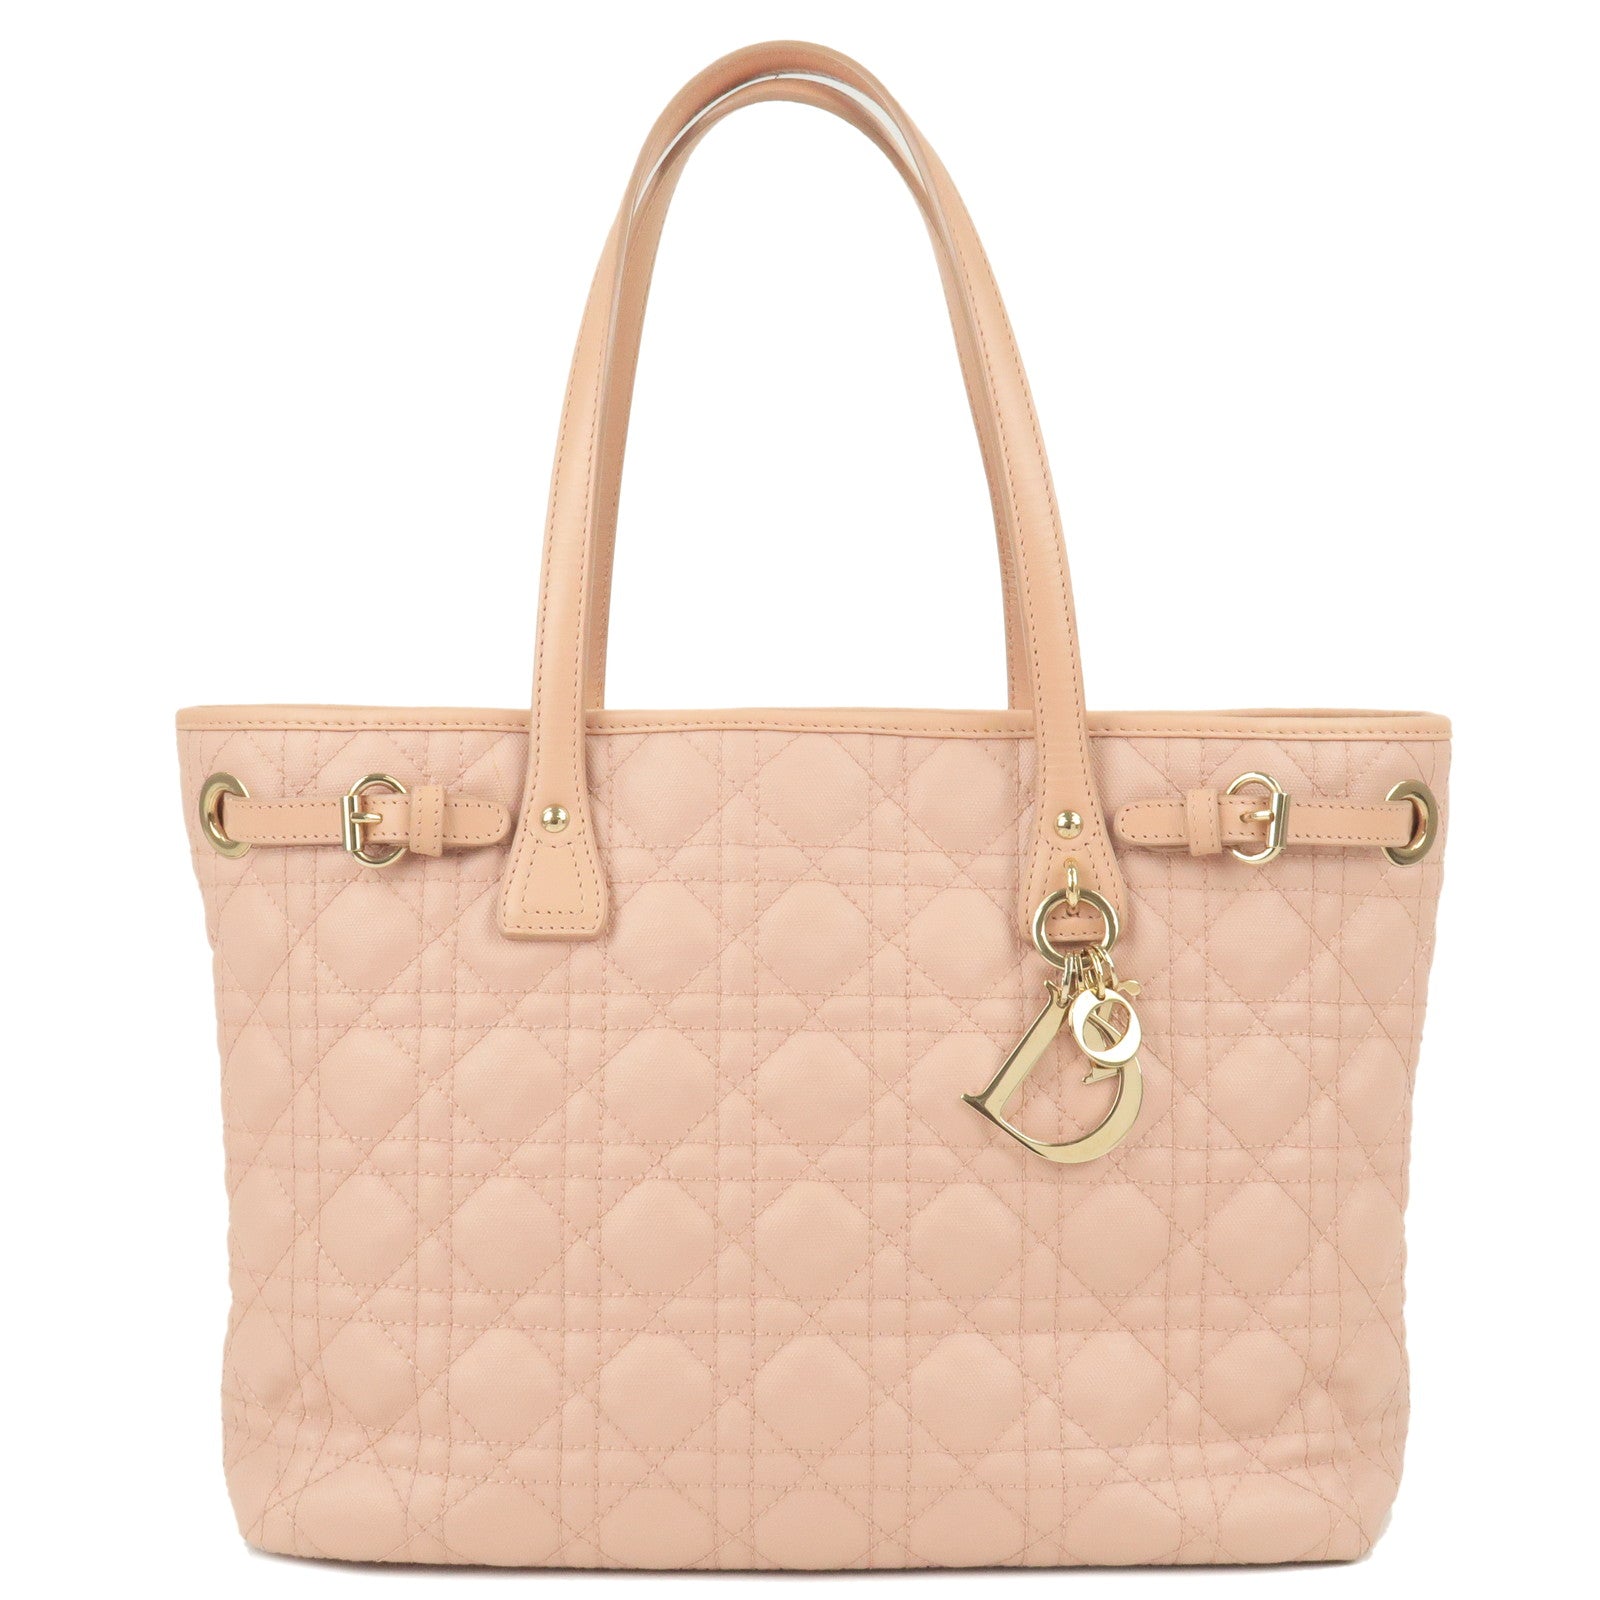 Christian-Dior-Cannage-Panarea-Canvas-Leather-Tote-Bag-Pink